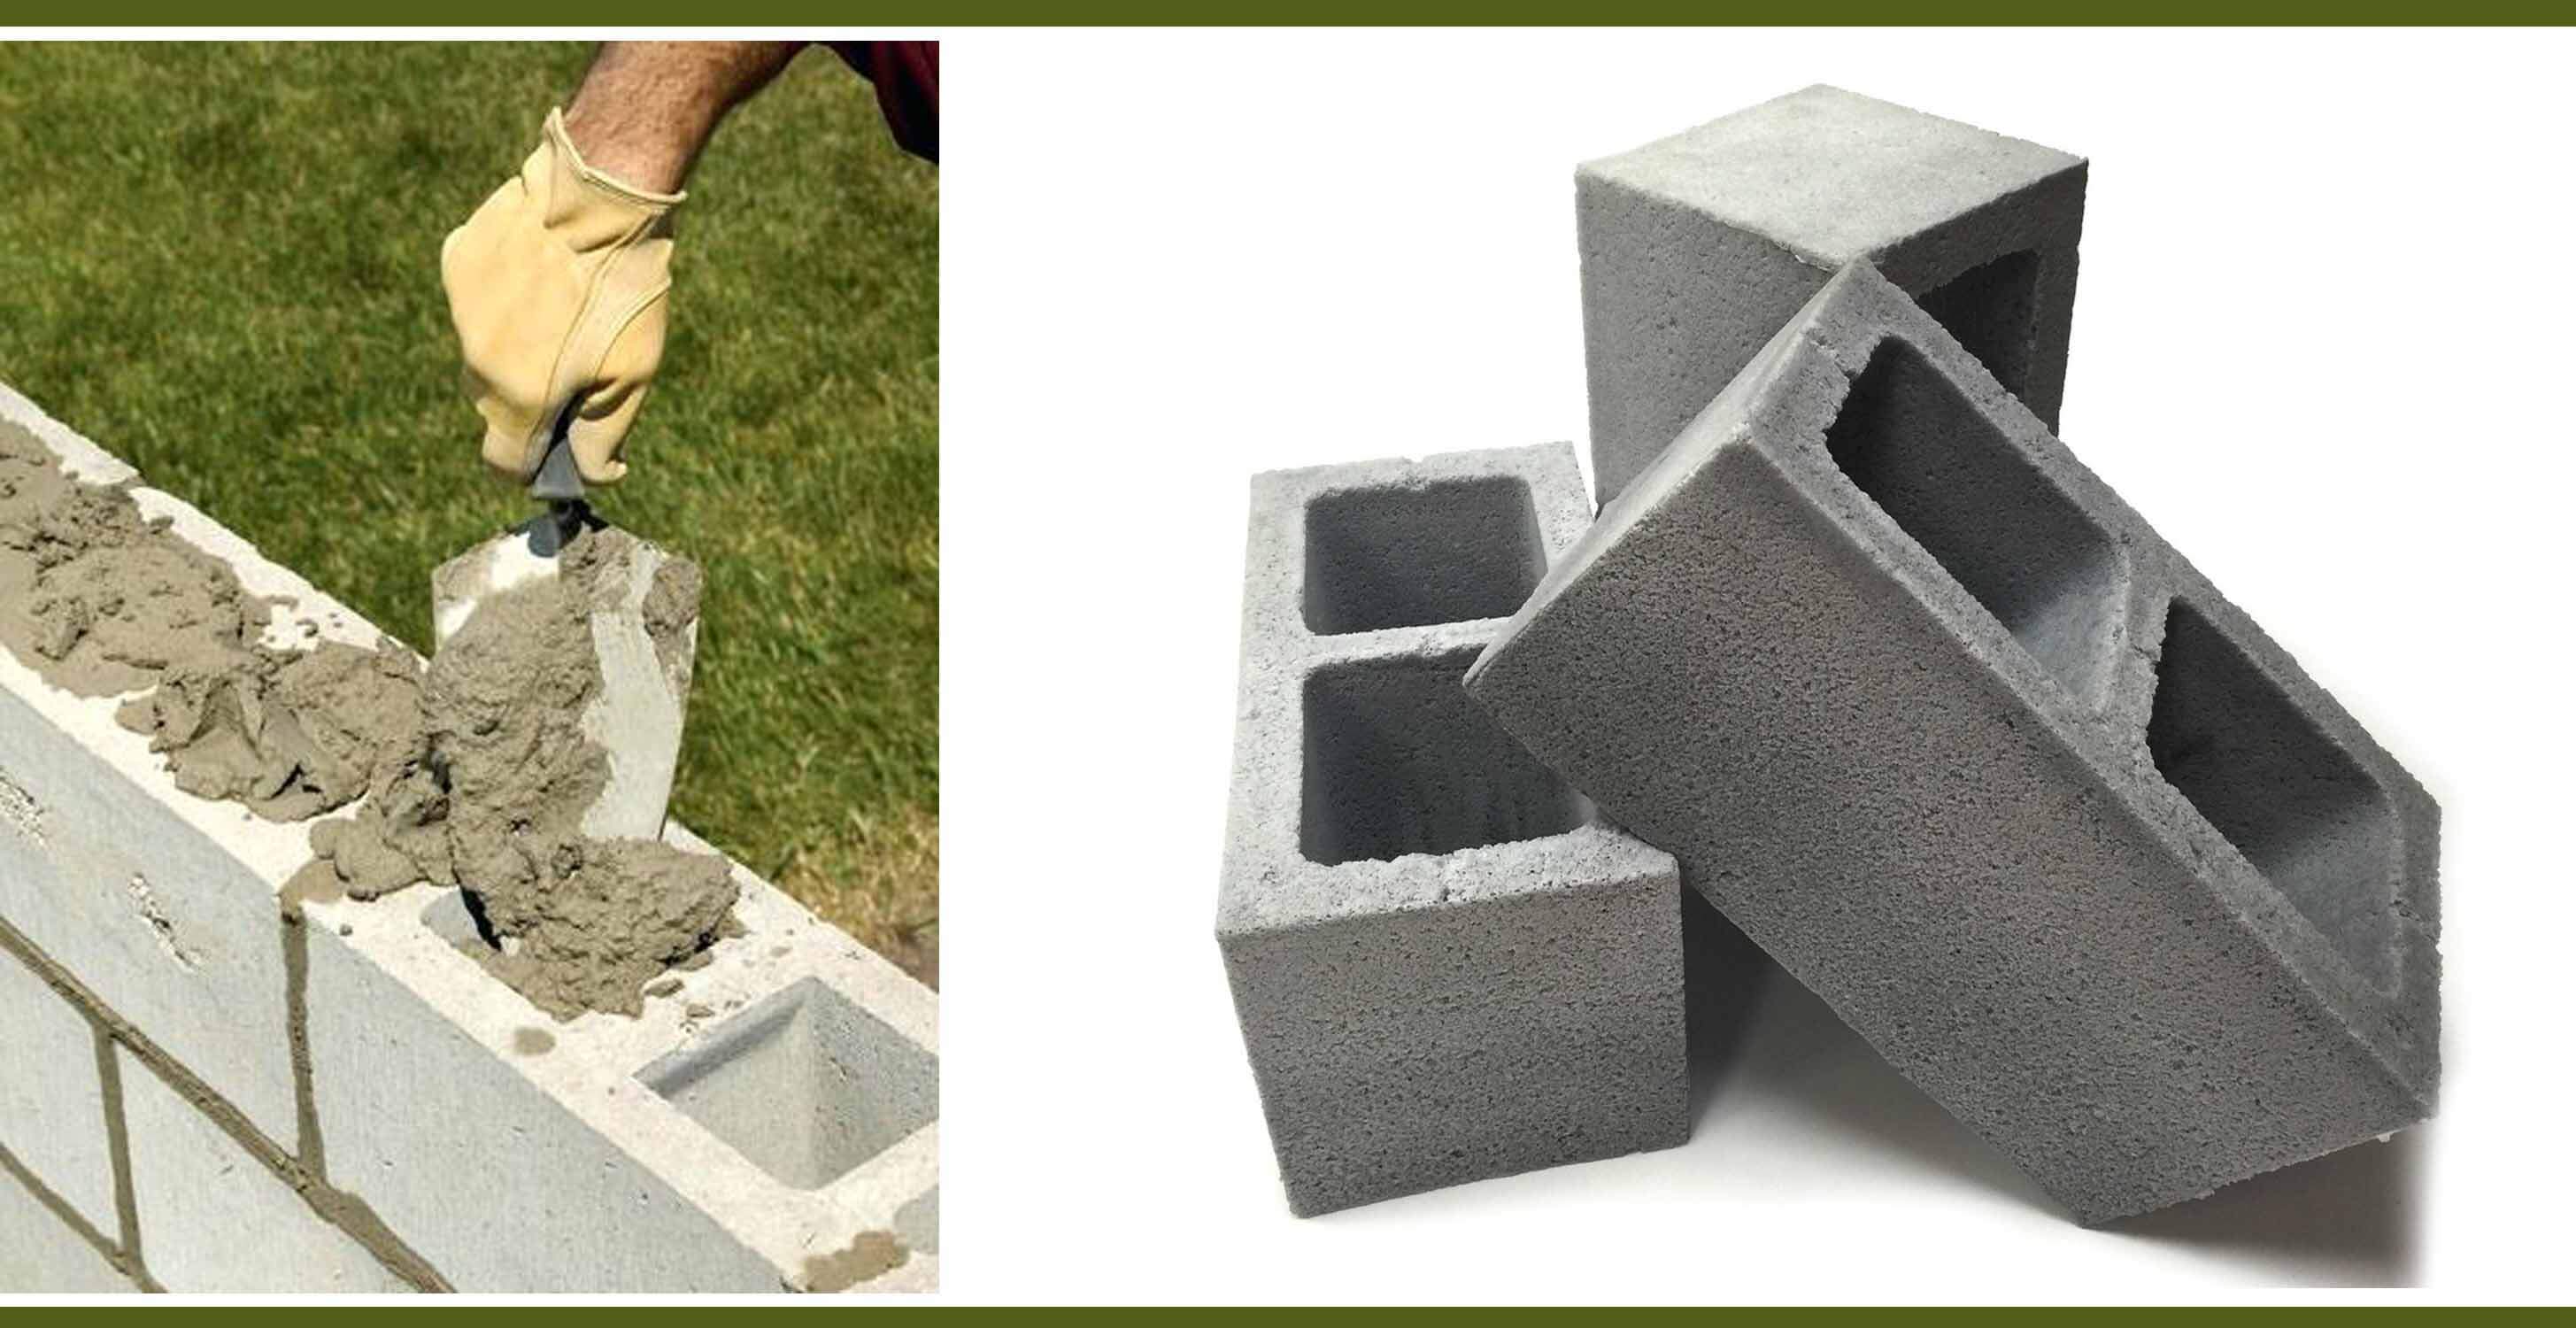 Why Do Concrete Blocks Have Holes In Them? - Engineering Discoveries